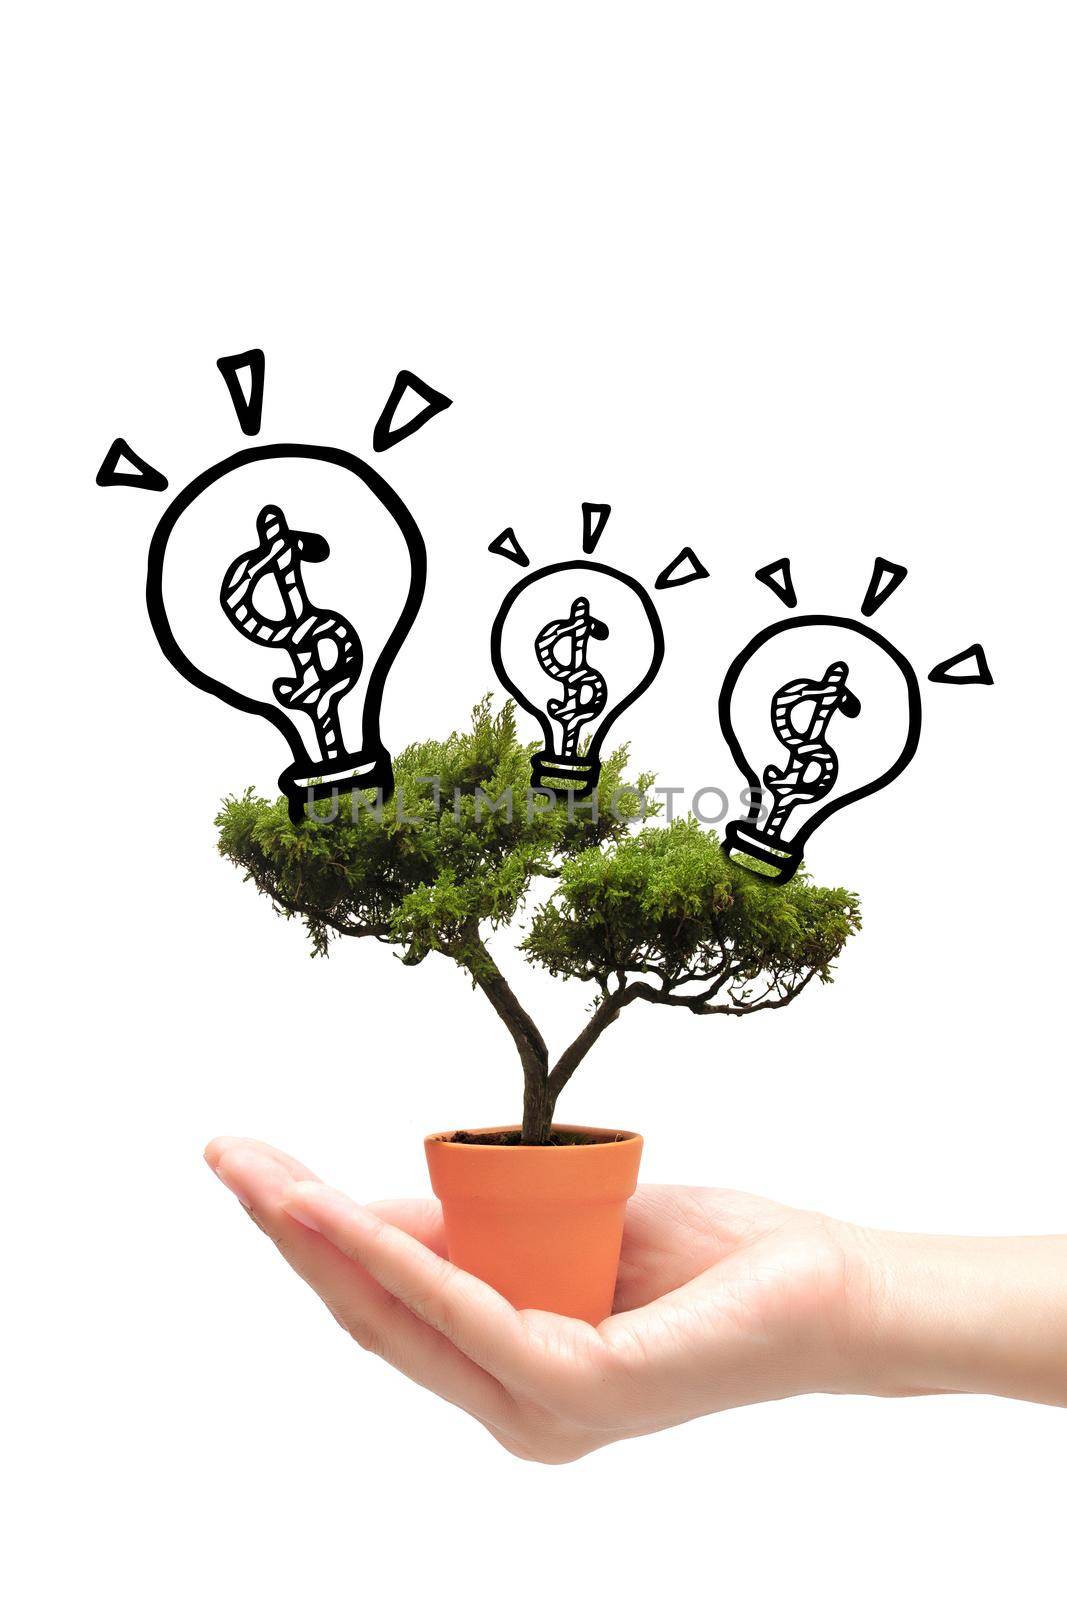 Business woman holding idea money tree in small pot on white background.Photo design for smart business, business idea and Financial growth concept.